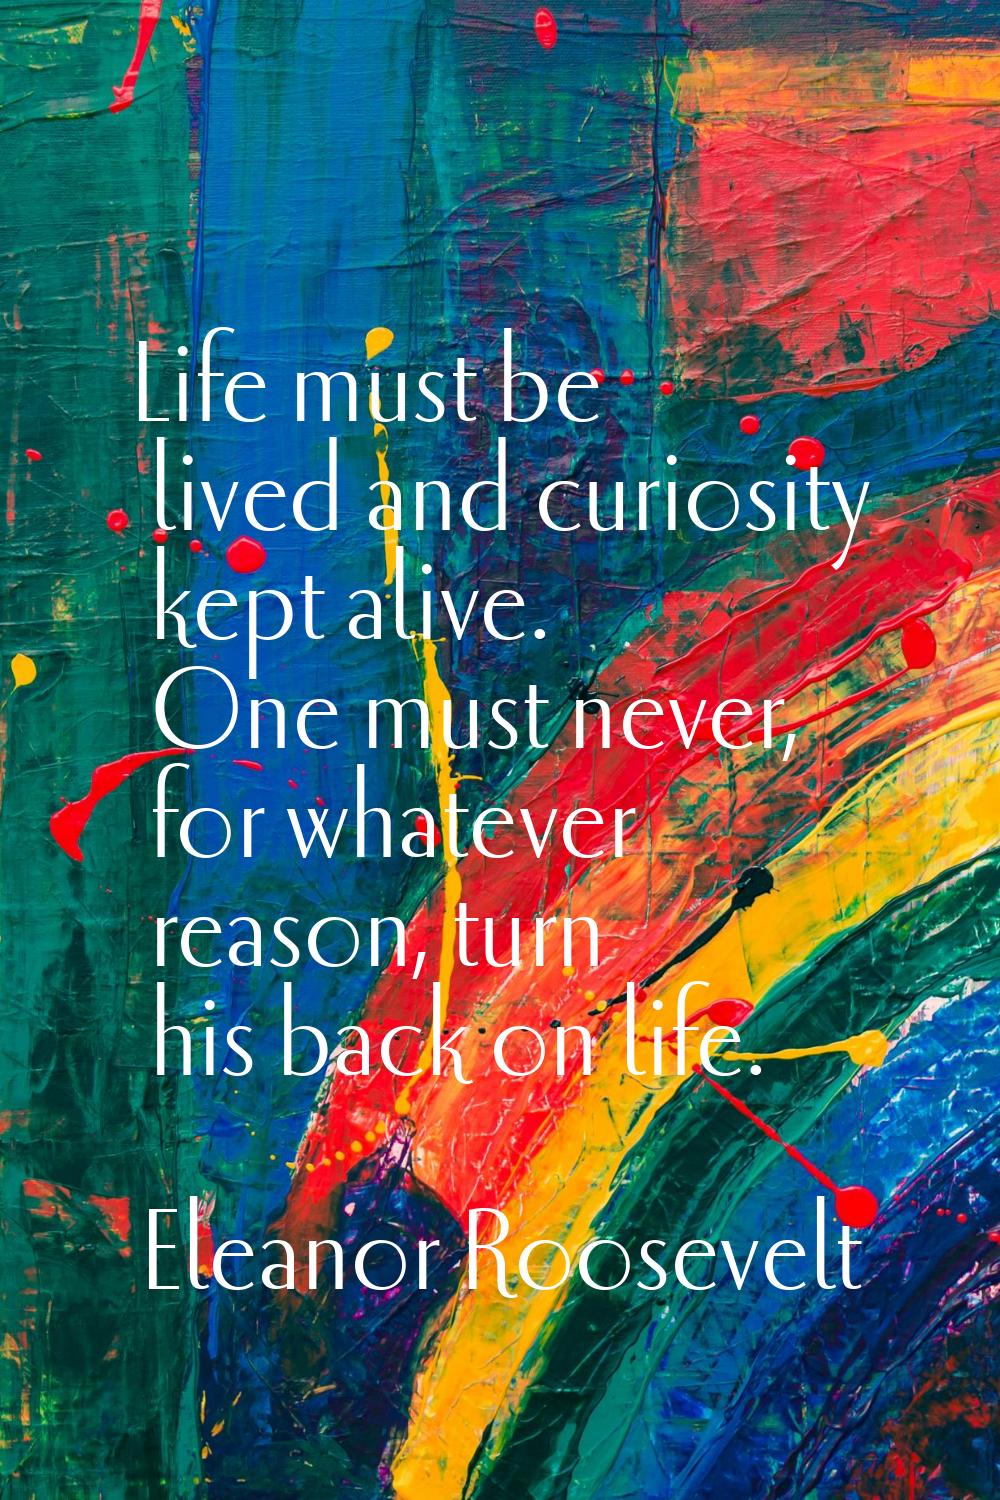 Life must be lived and curiosity kept alive. One must never, for whatever reason, turn his back on 